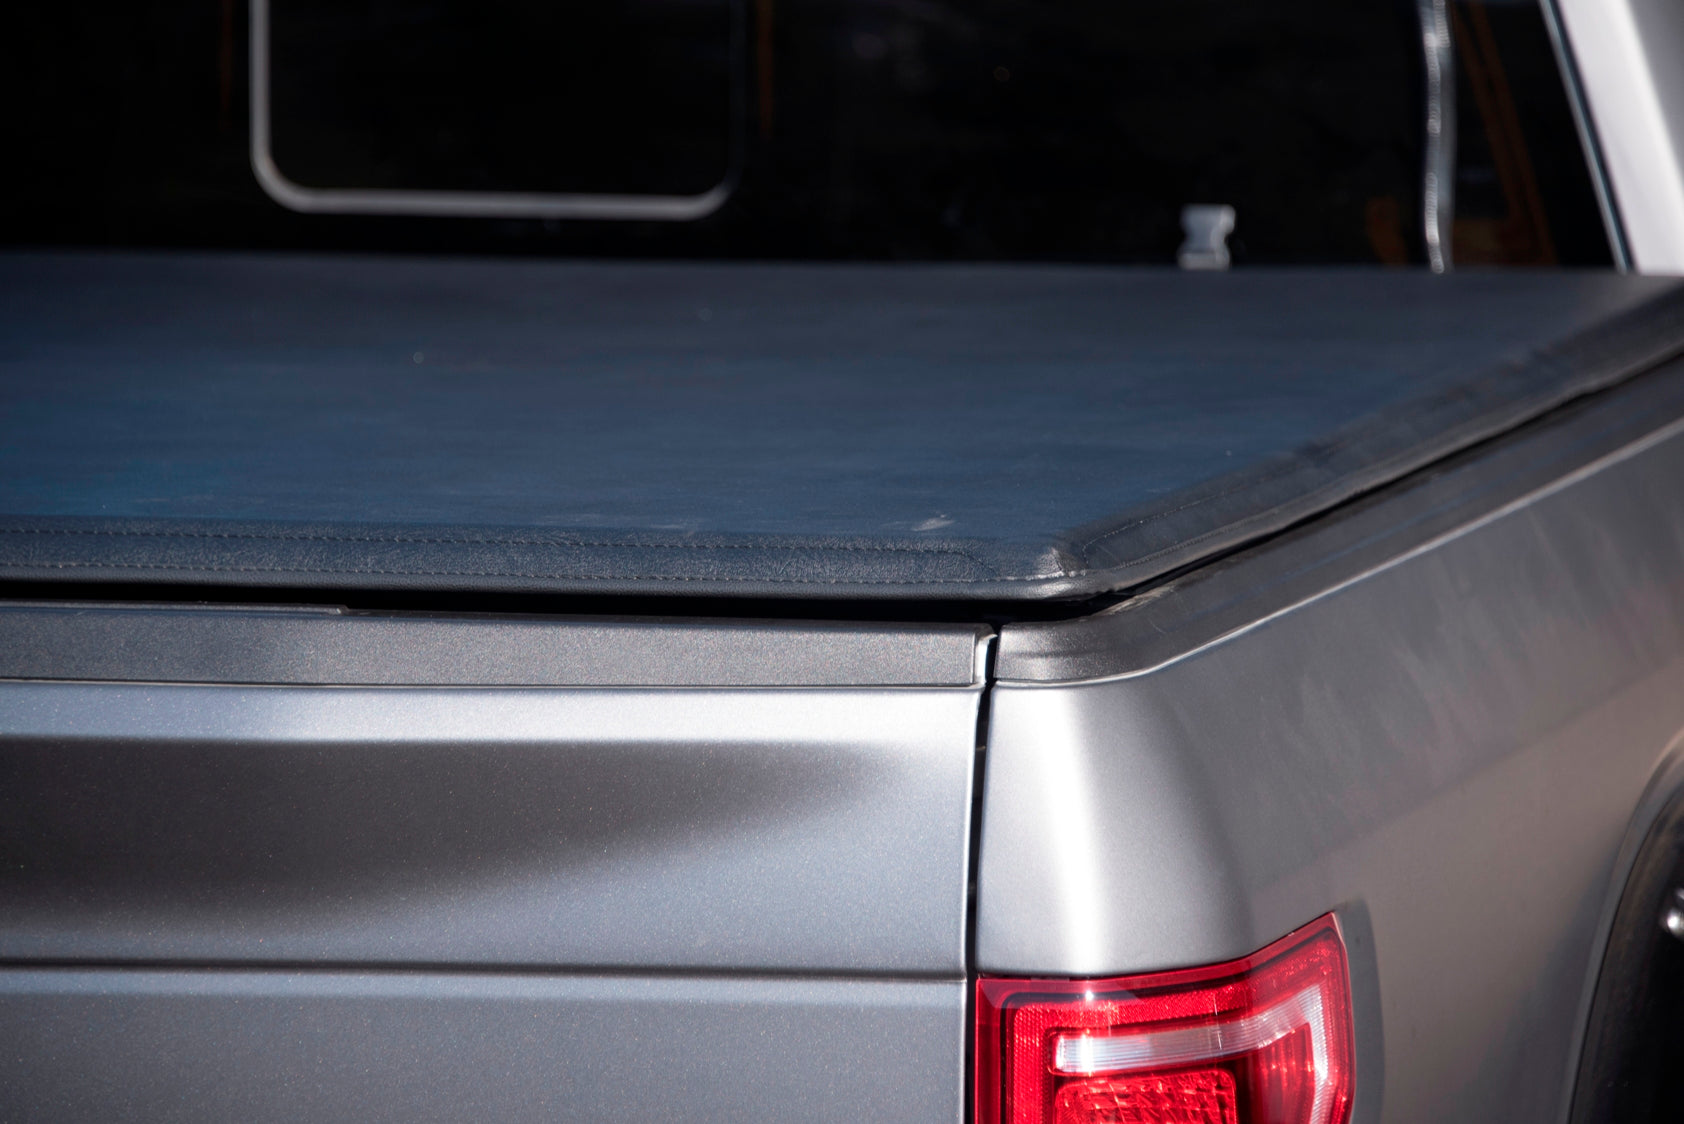 Armordillo 2005-2015 Toyota Tacoma CoveRex TF Series Folding Truck Bed Tonneau Cover (5 FT Bed) - Bayson R Motorsports